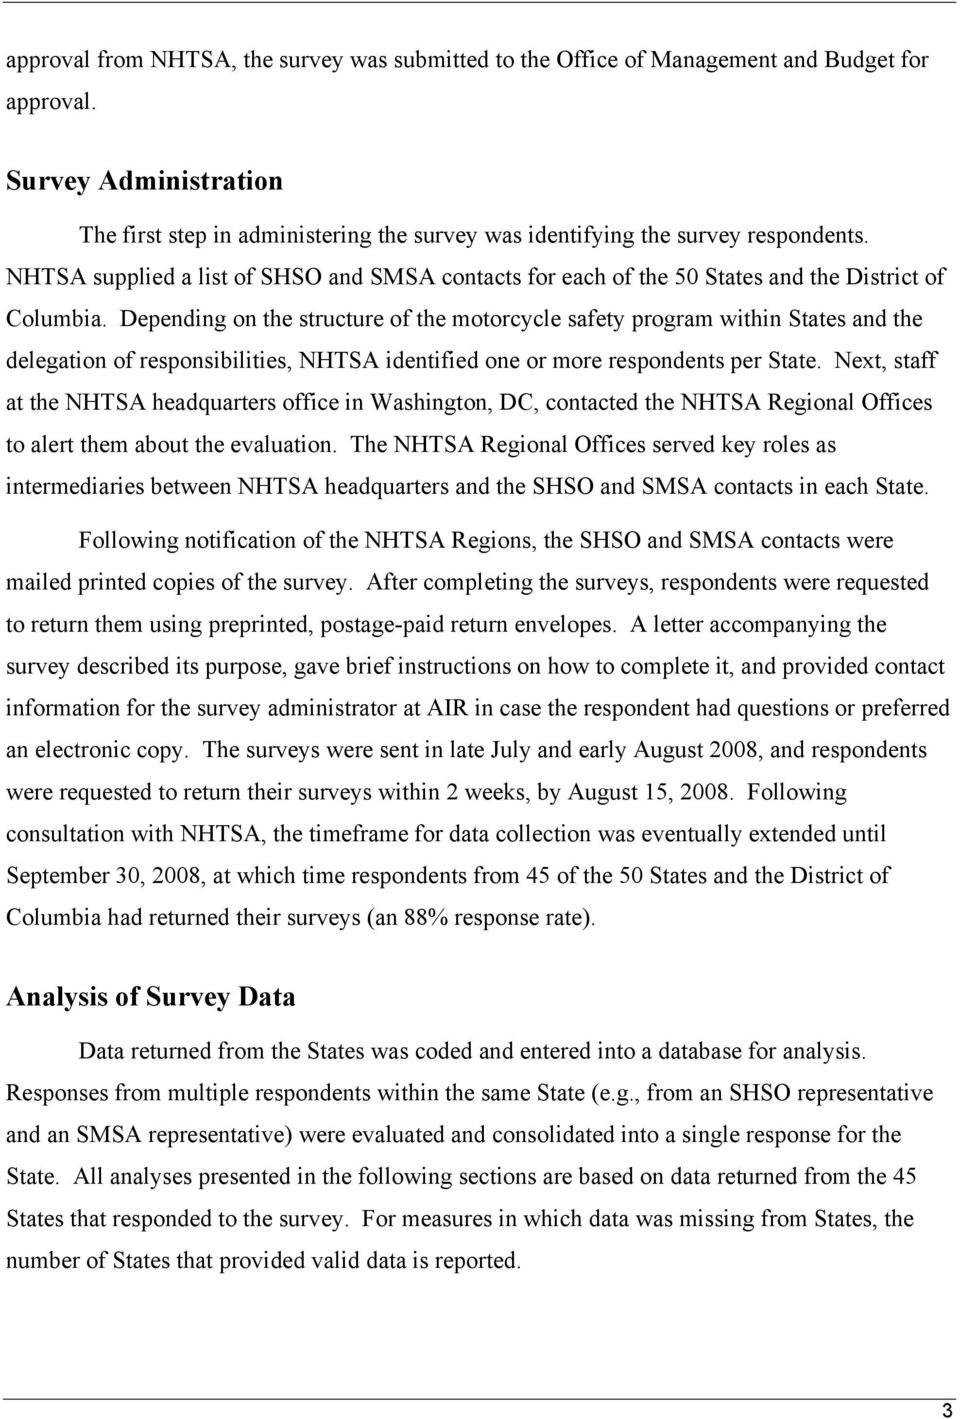 NHTSA supplied a list of SHSO and SMSA contacts for each of the 50 States and the District of Columbia.